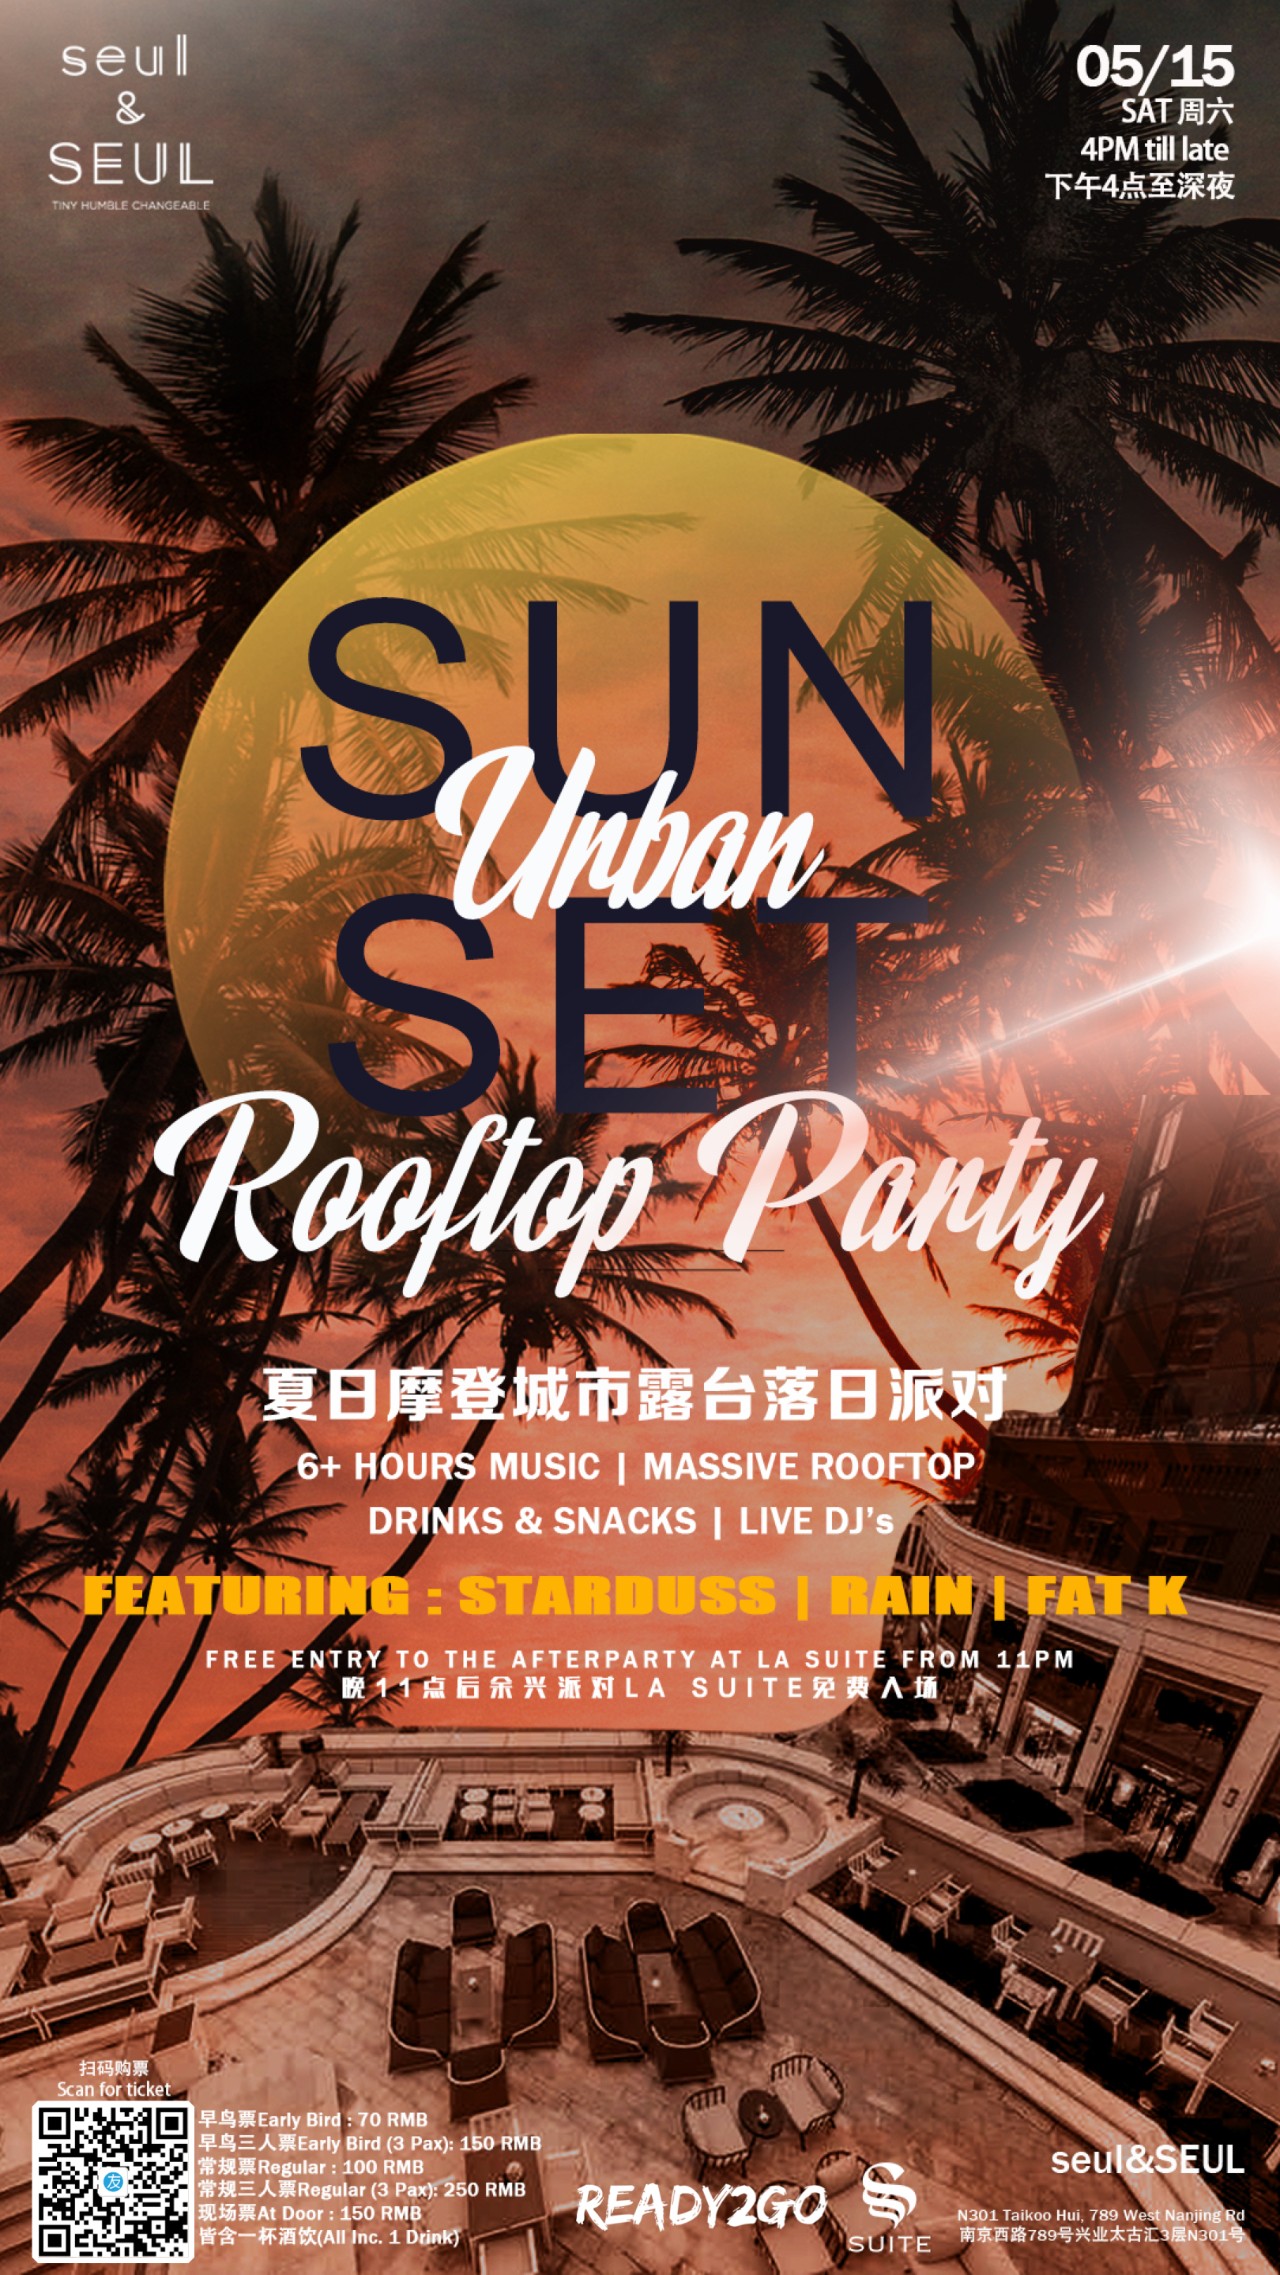 Urban rooftop party | Shanghai Events